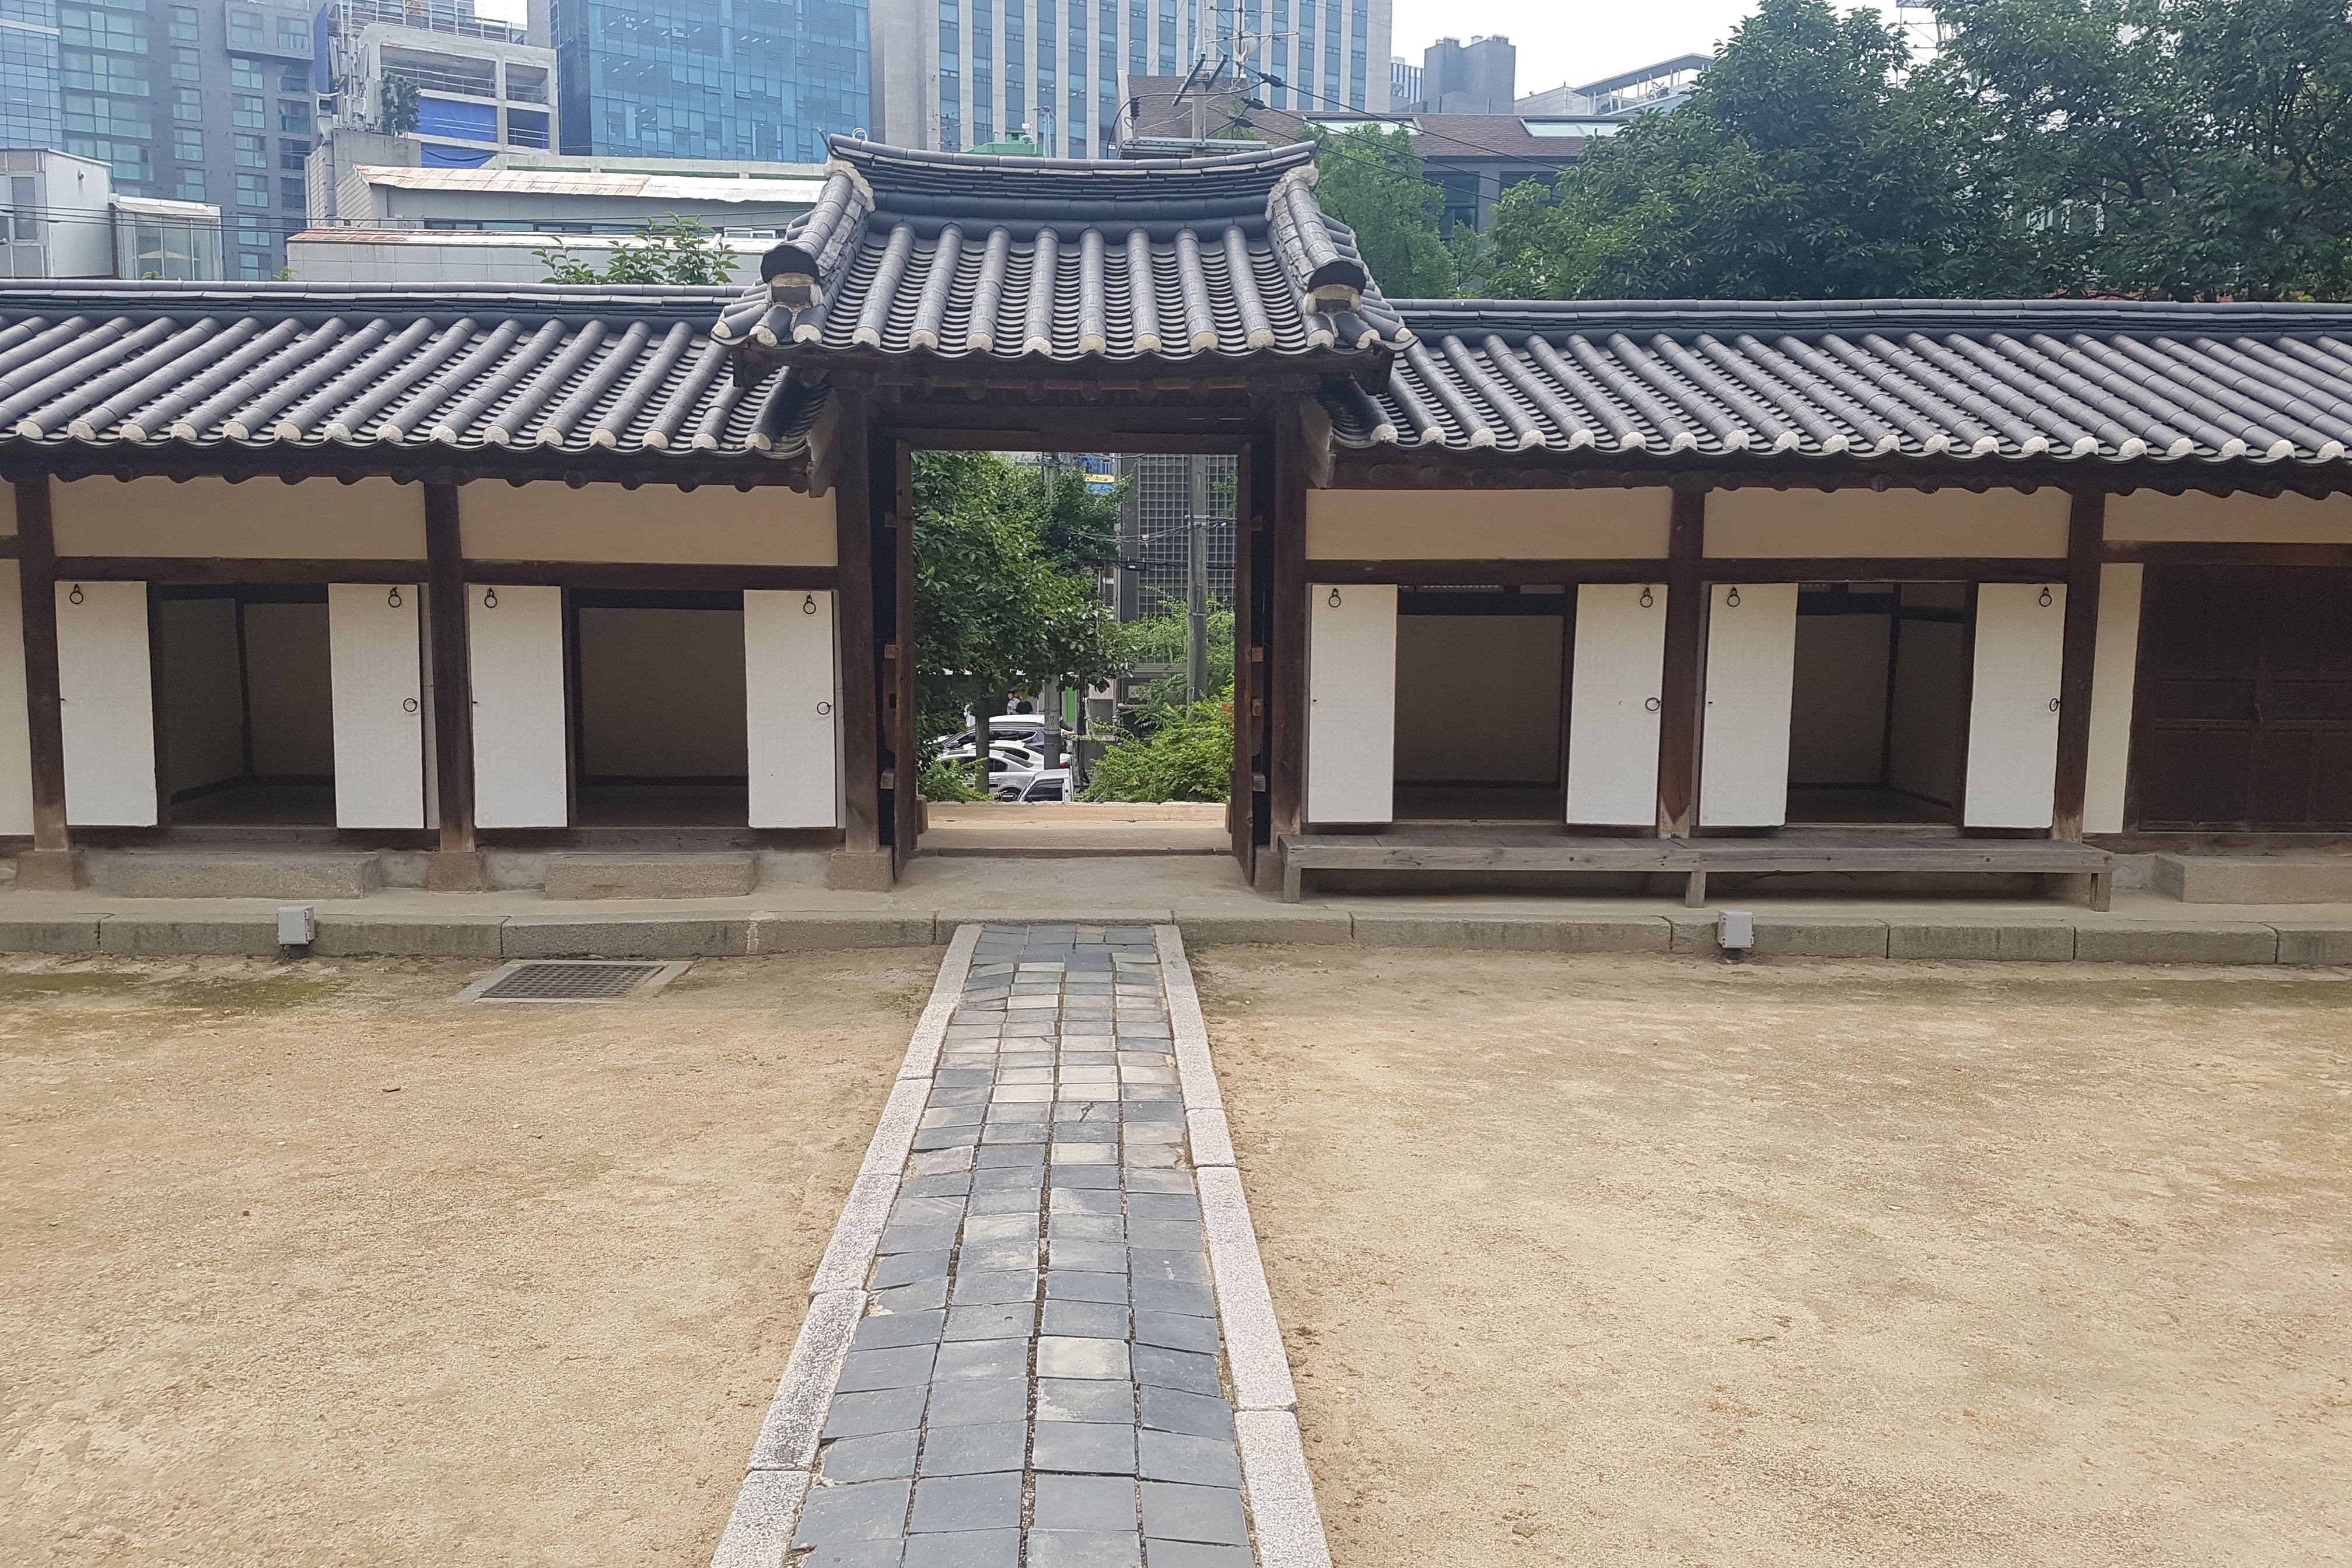 Seolleung and Jeongneung Royal Tombs1 : Roads in Seolleung and Jeongneung Royal Tombs where tile doors are seen
